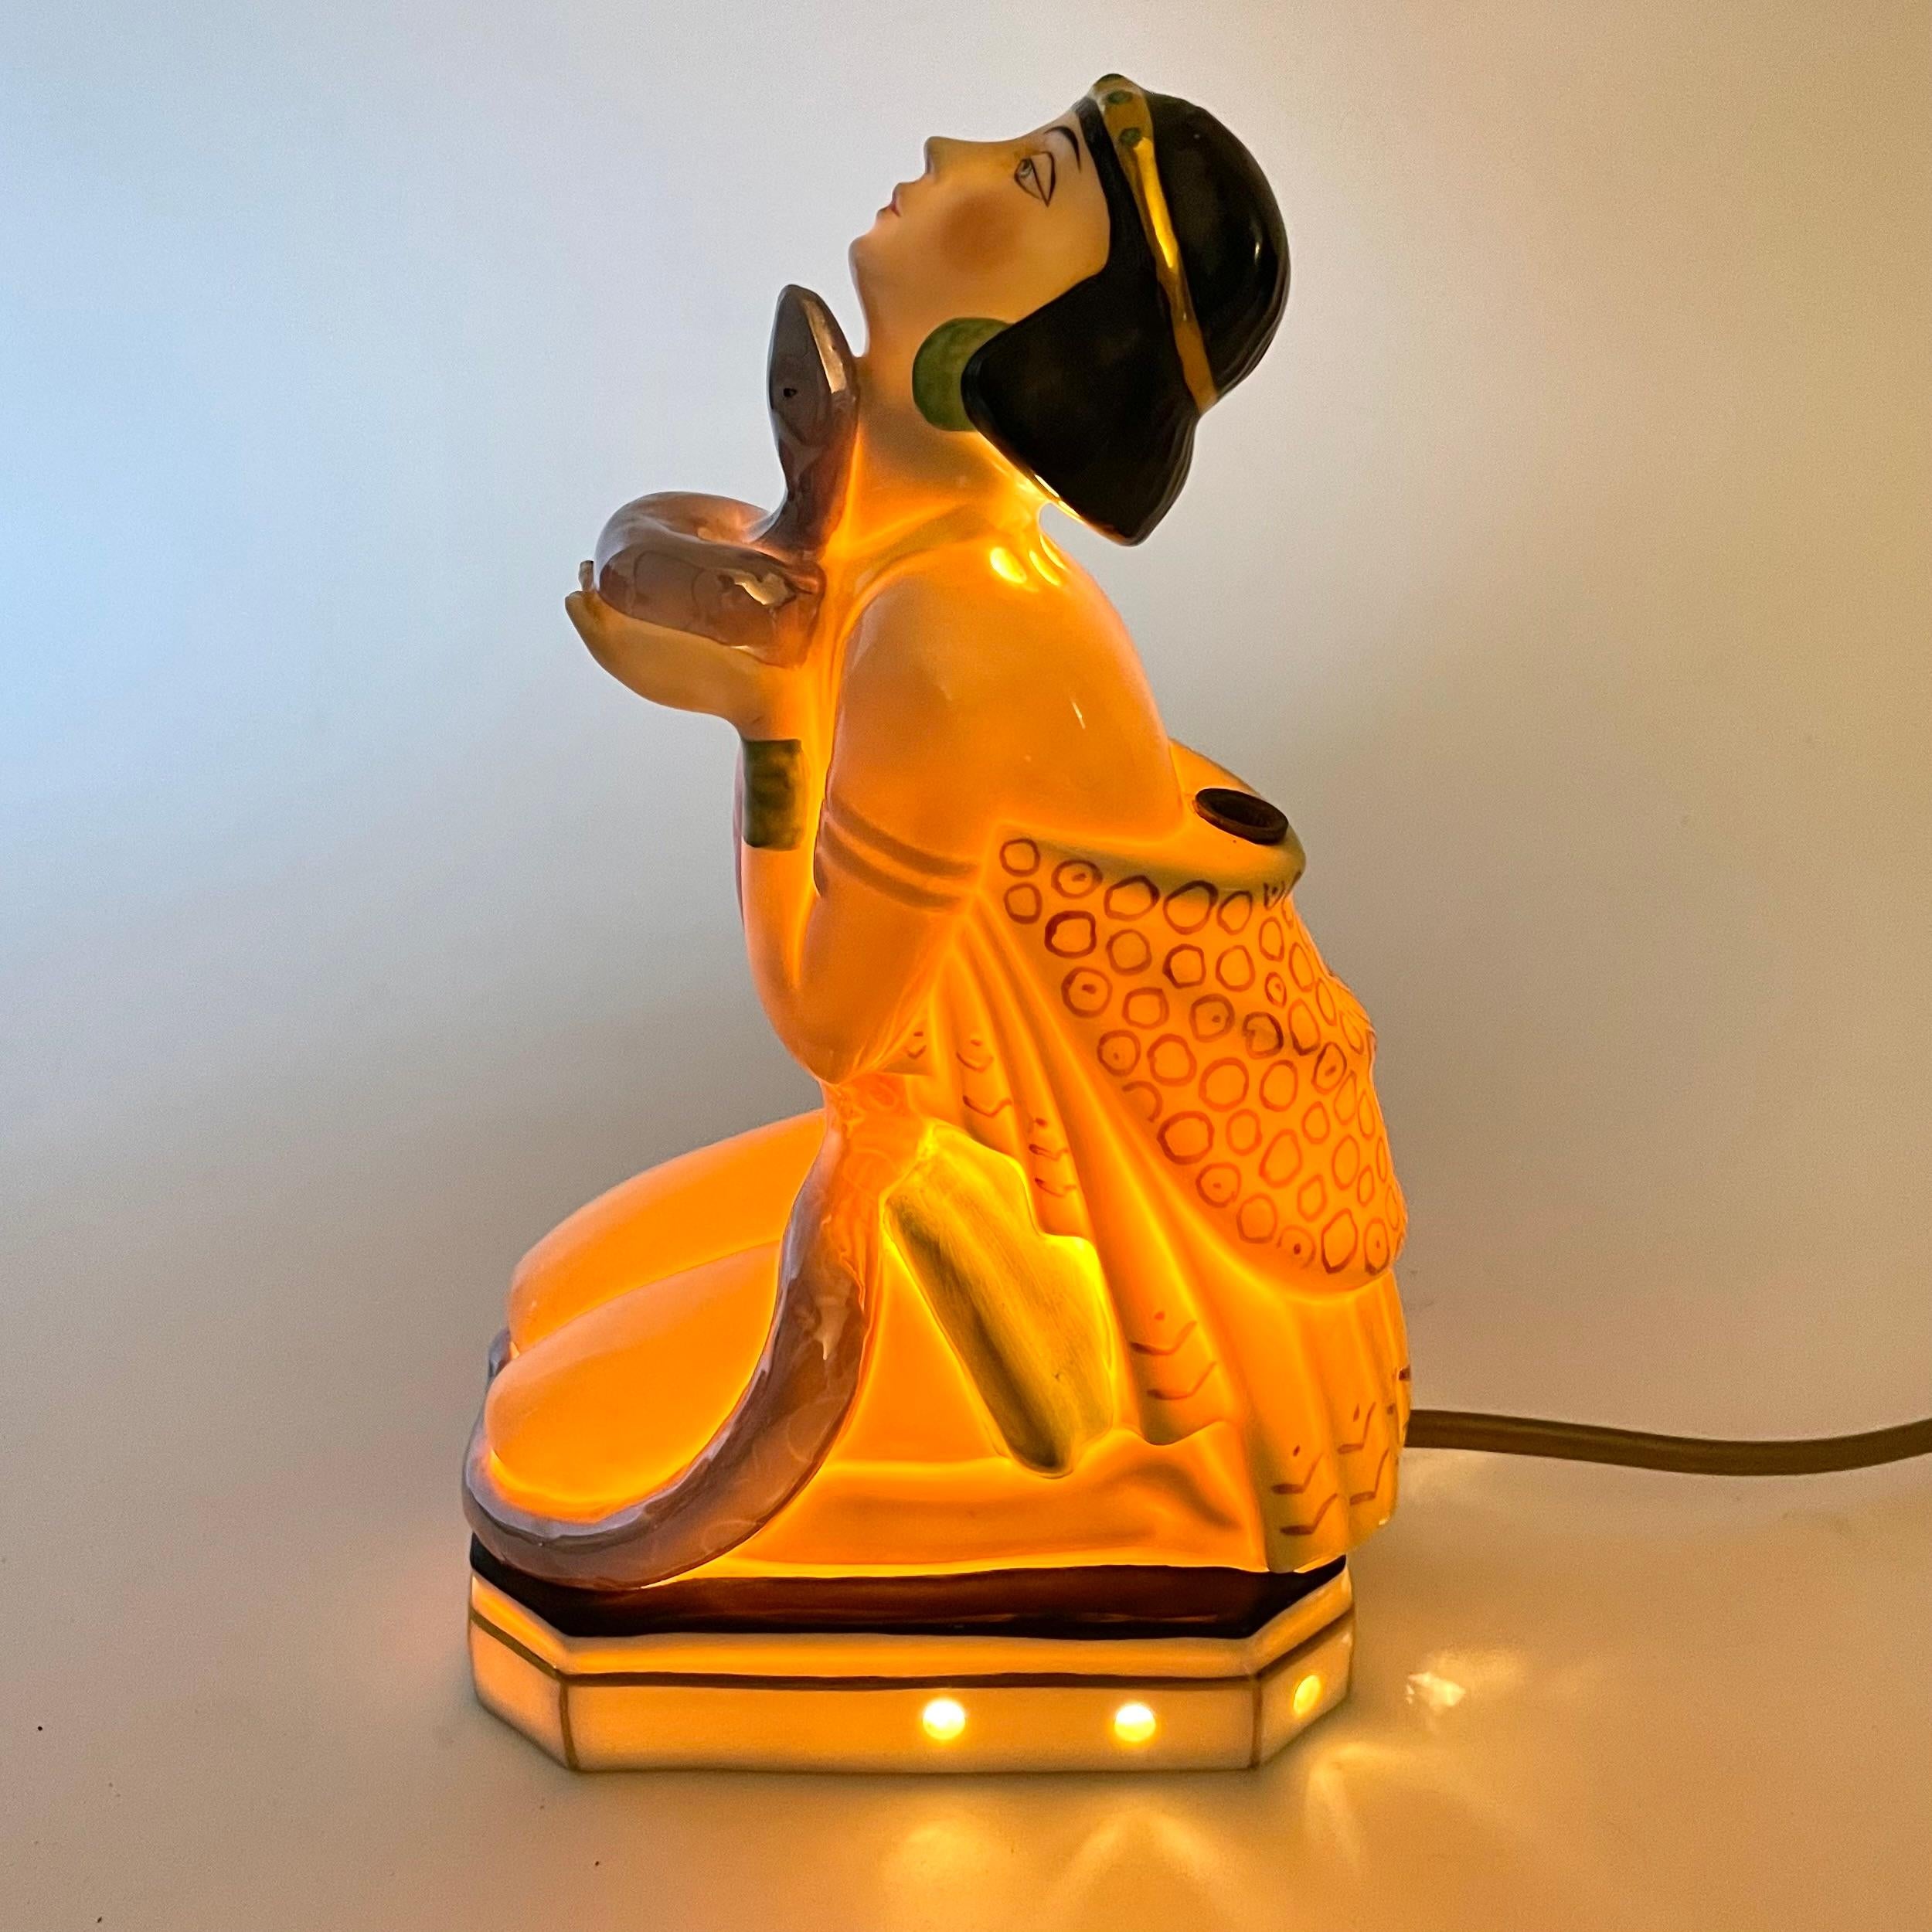 Oriental Art Deco Sculptural Table Lamp with Pen Stand, Lady with Serpent, 1920s 2